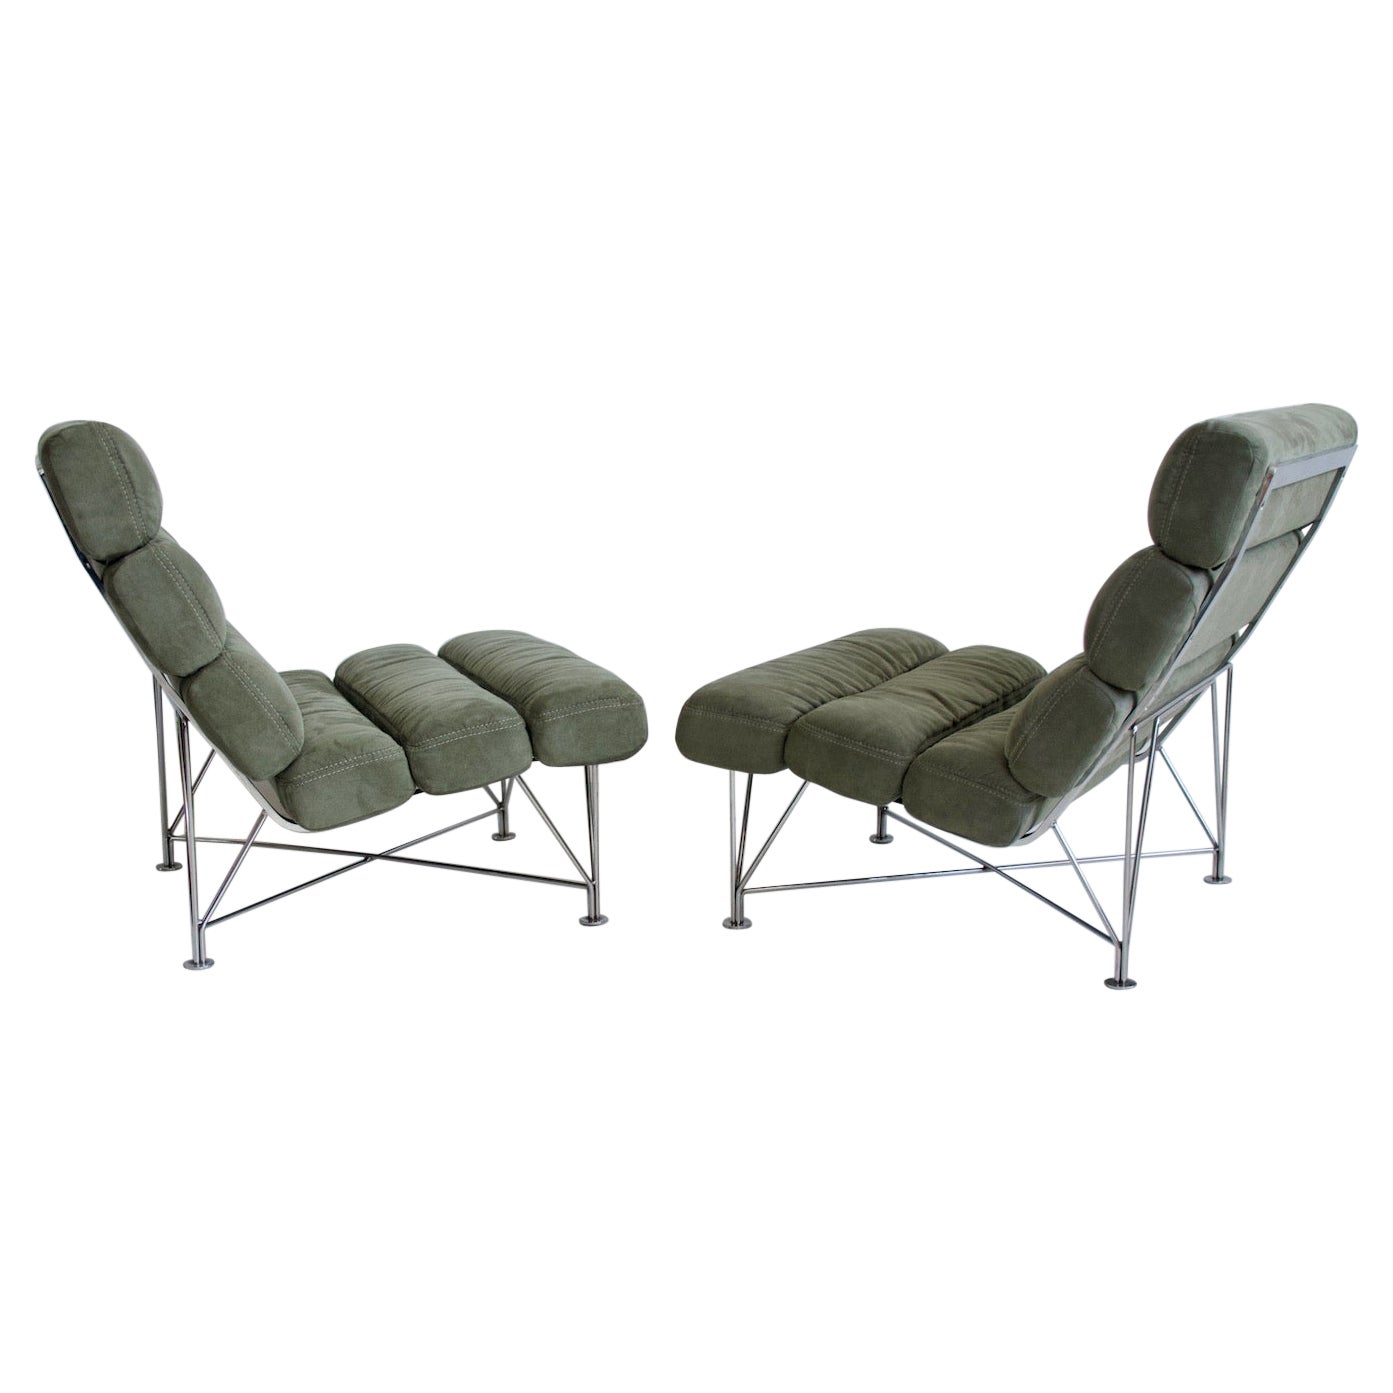 Pair of Green Lounge Chairs with Steel Frame by DUX Design Team For Sale